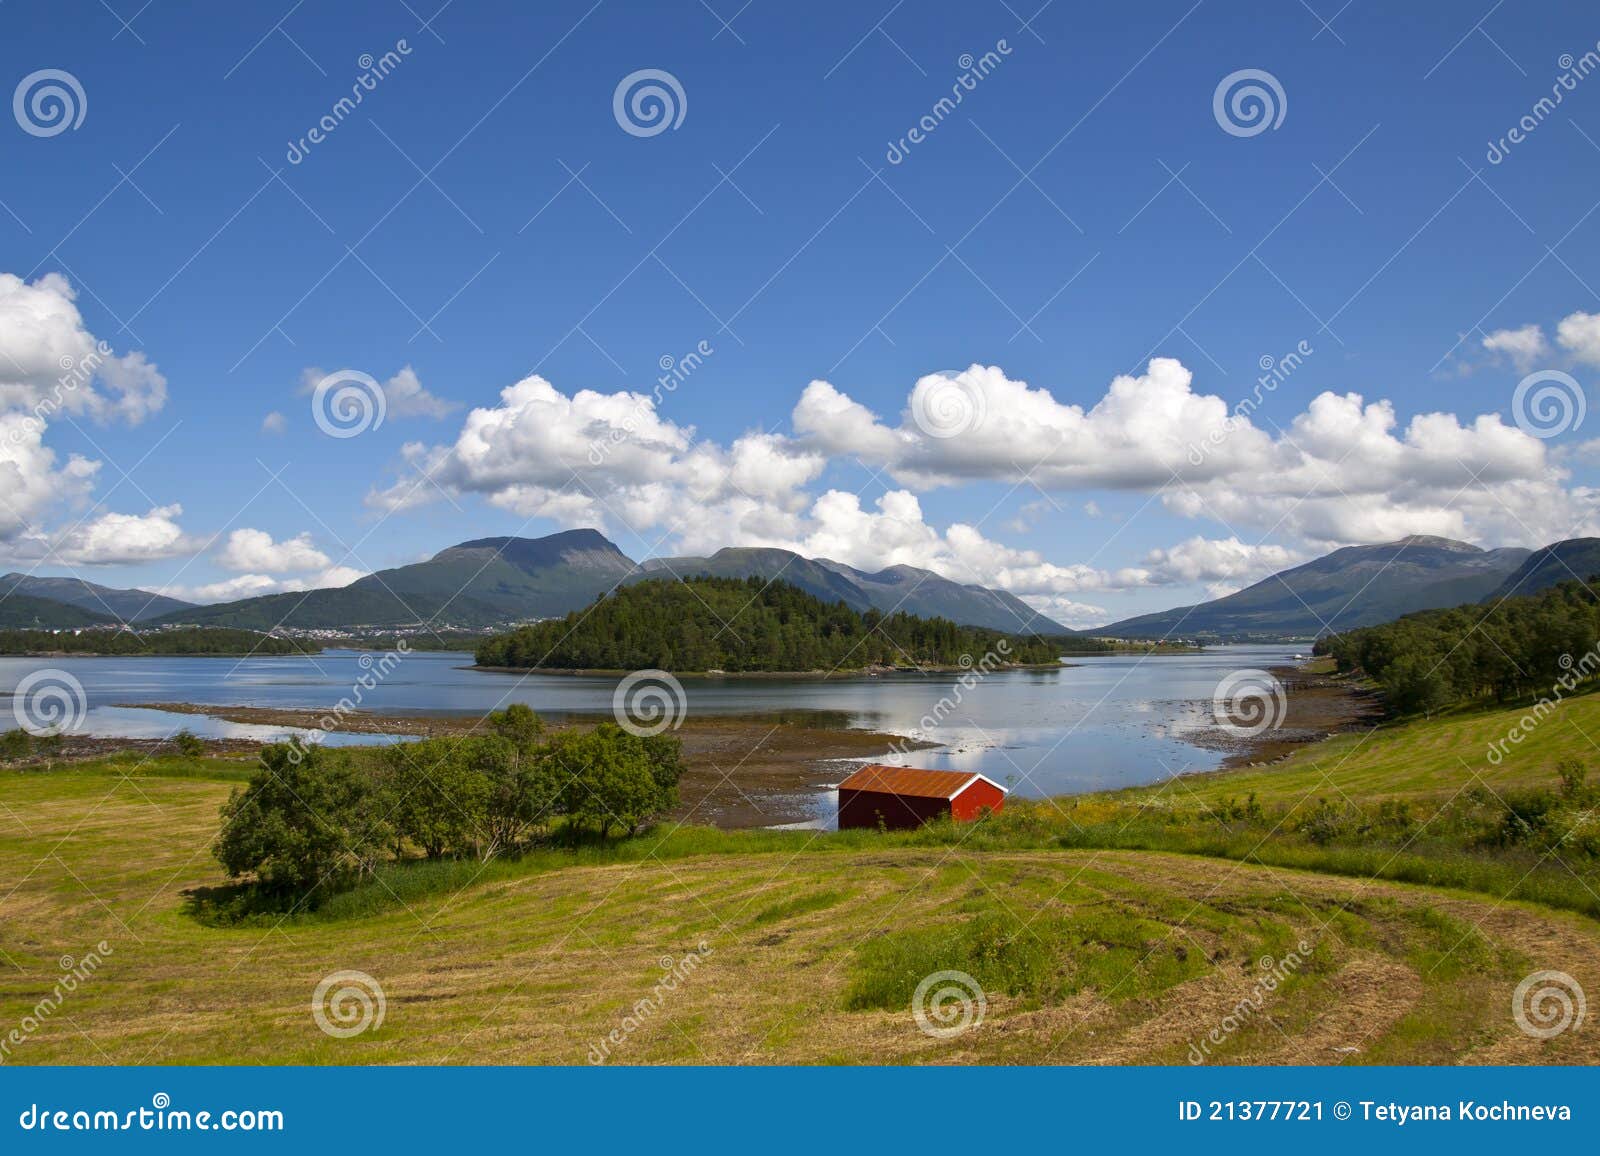 rural lanscape of norway